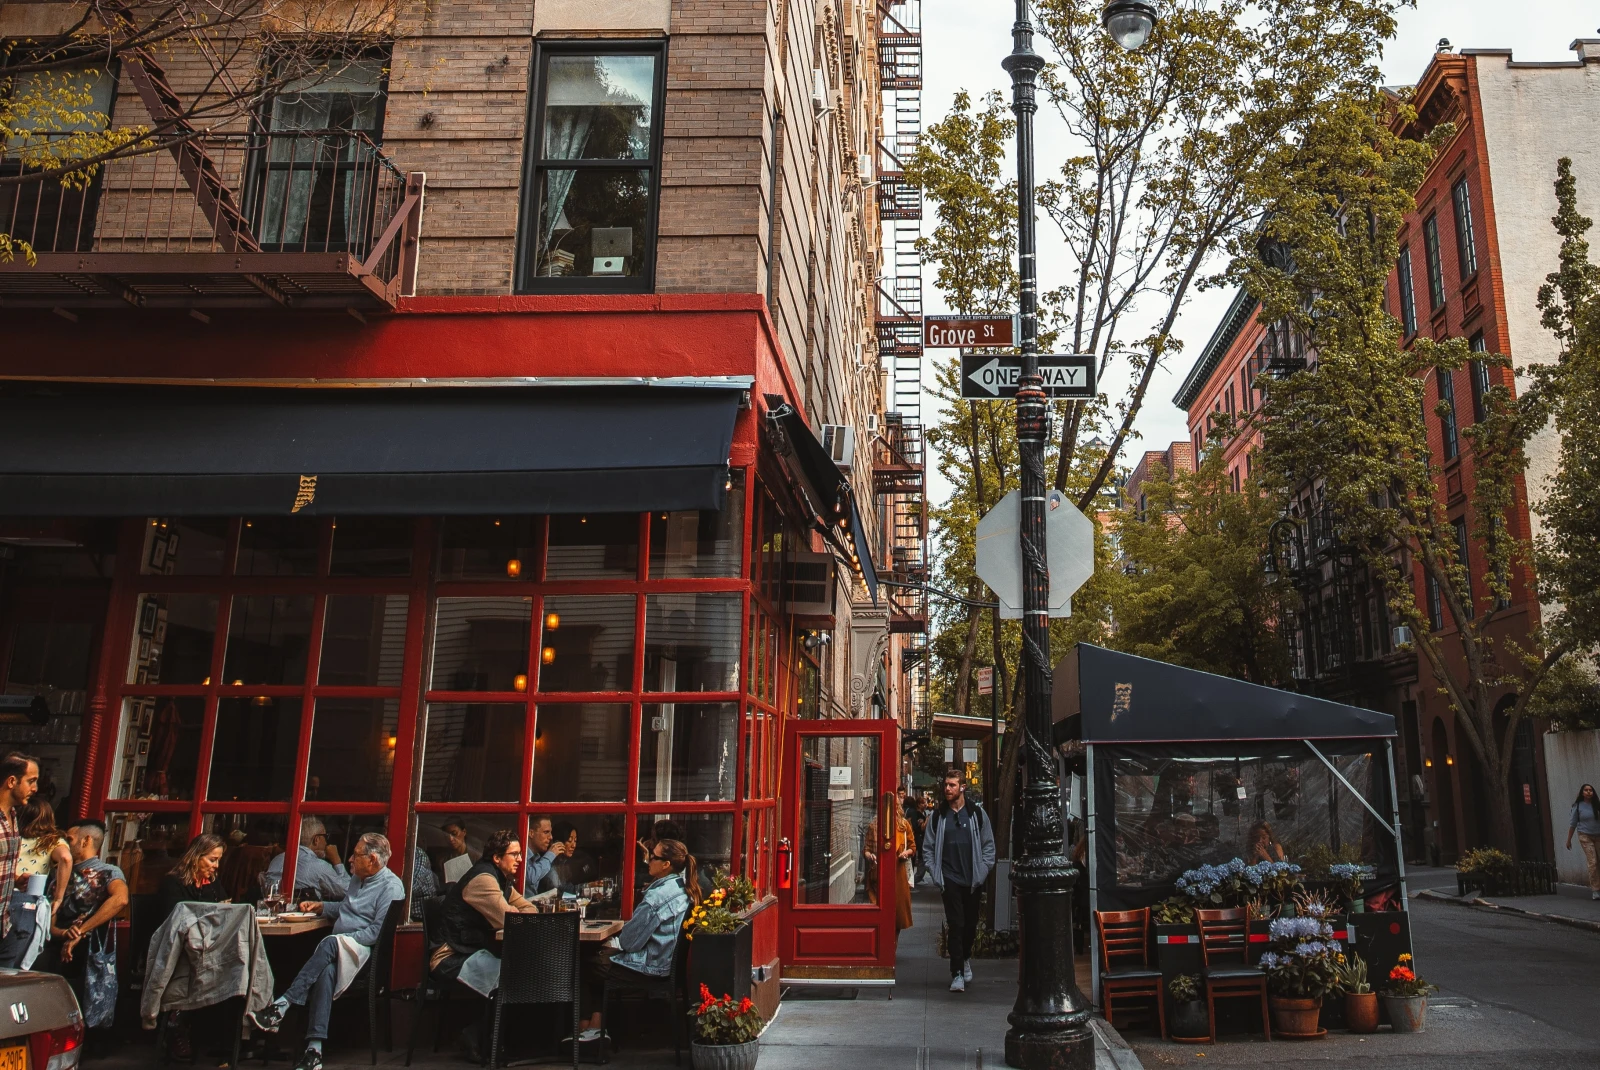 Local's Guide to Food, Shopping & More in Soho & Nolita - Places to eat & drink